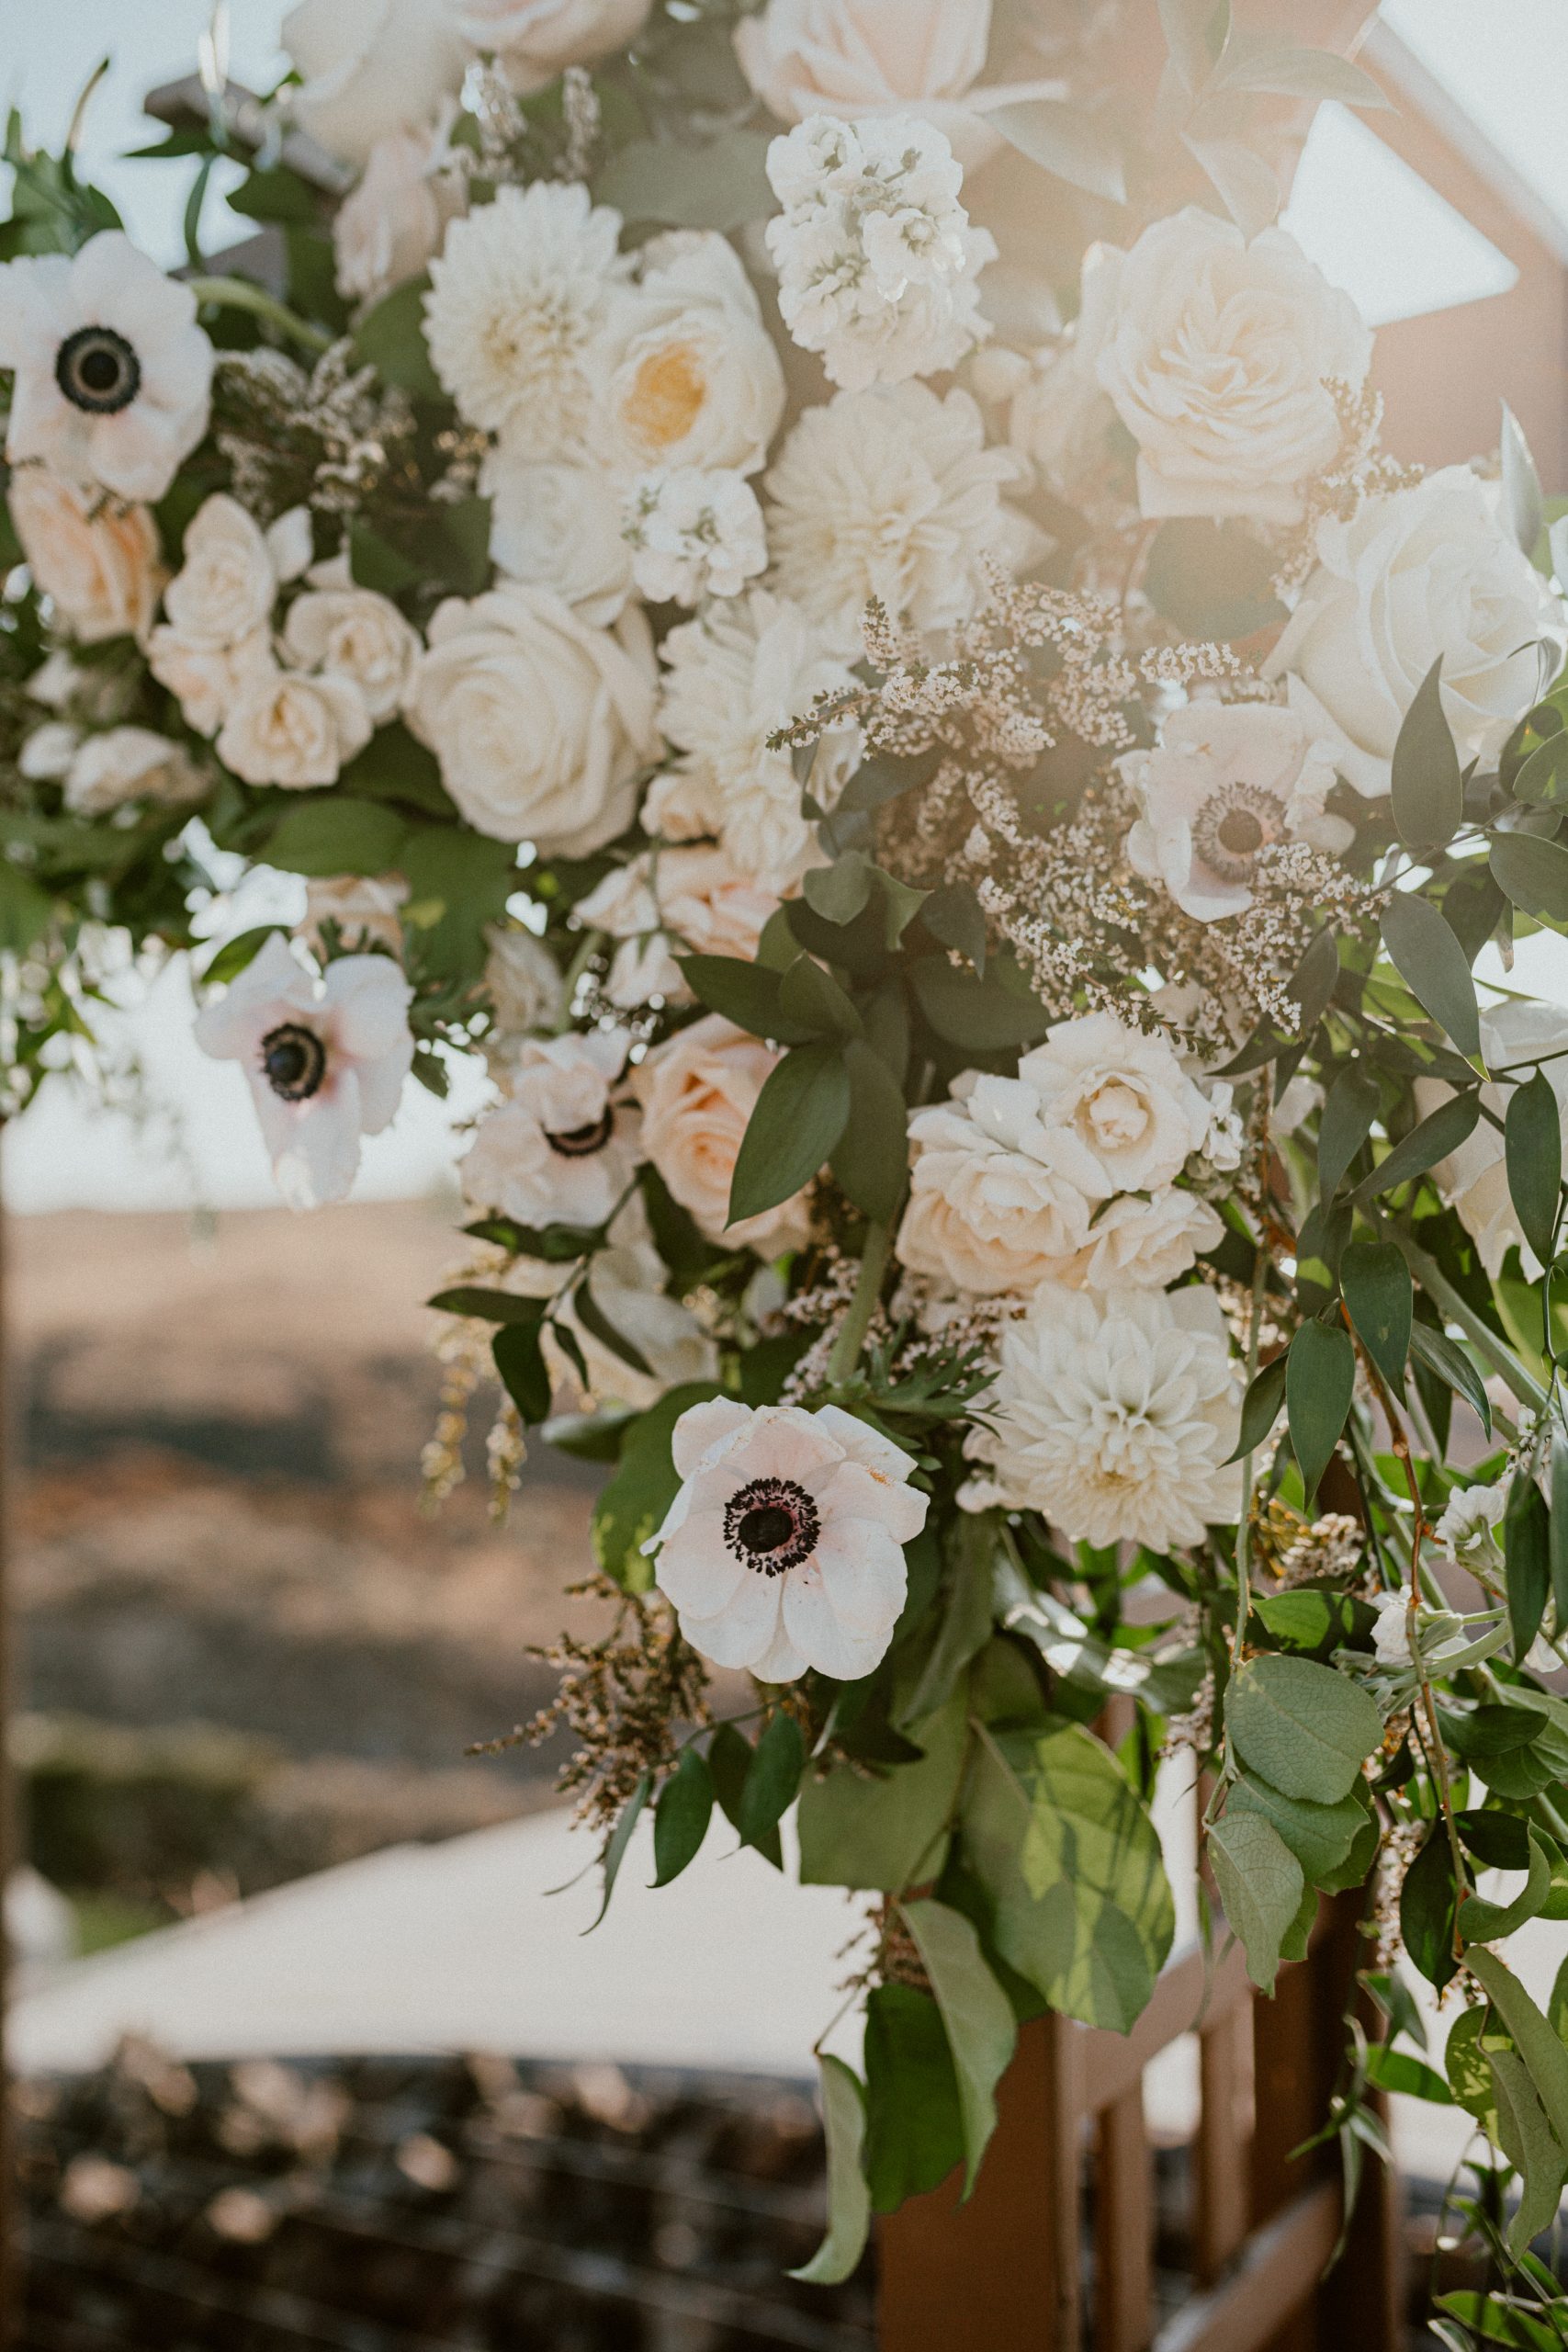 detail shots of white wedding day floral bouquets and wedding arch inspiration for Fall wedding day decor | Washington Elopement, Destination Elopement Photographer, Cave B Inn Elopement Inspiration, Washington Elopement ideas, PNW Fall Wedding Inspiration, Fall Outdoor Wedding Ideas,Fall Wedding Inspiration, PNW Outdoor Wedding Ideas | chelseaabril.com